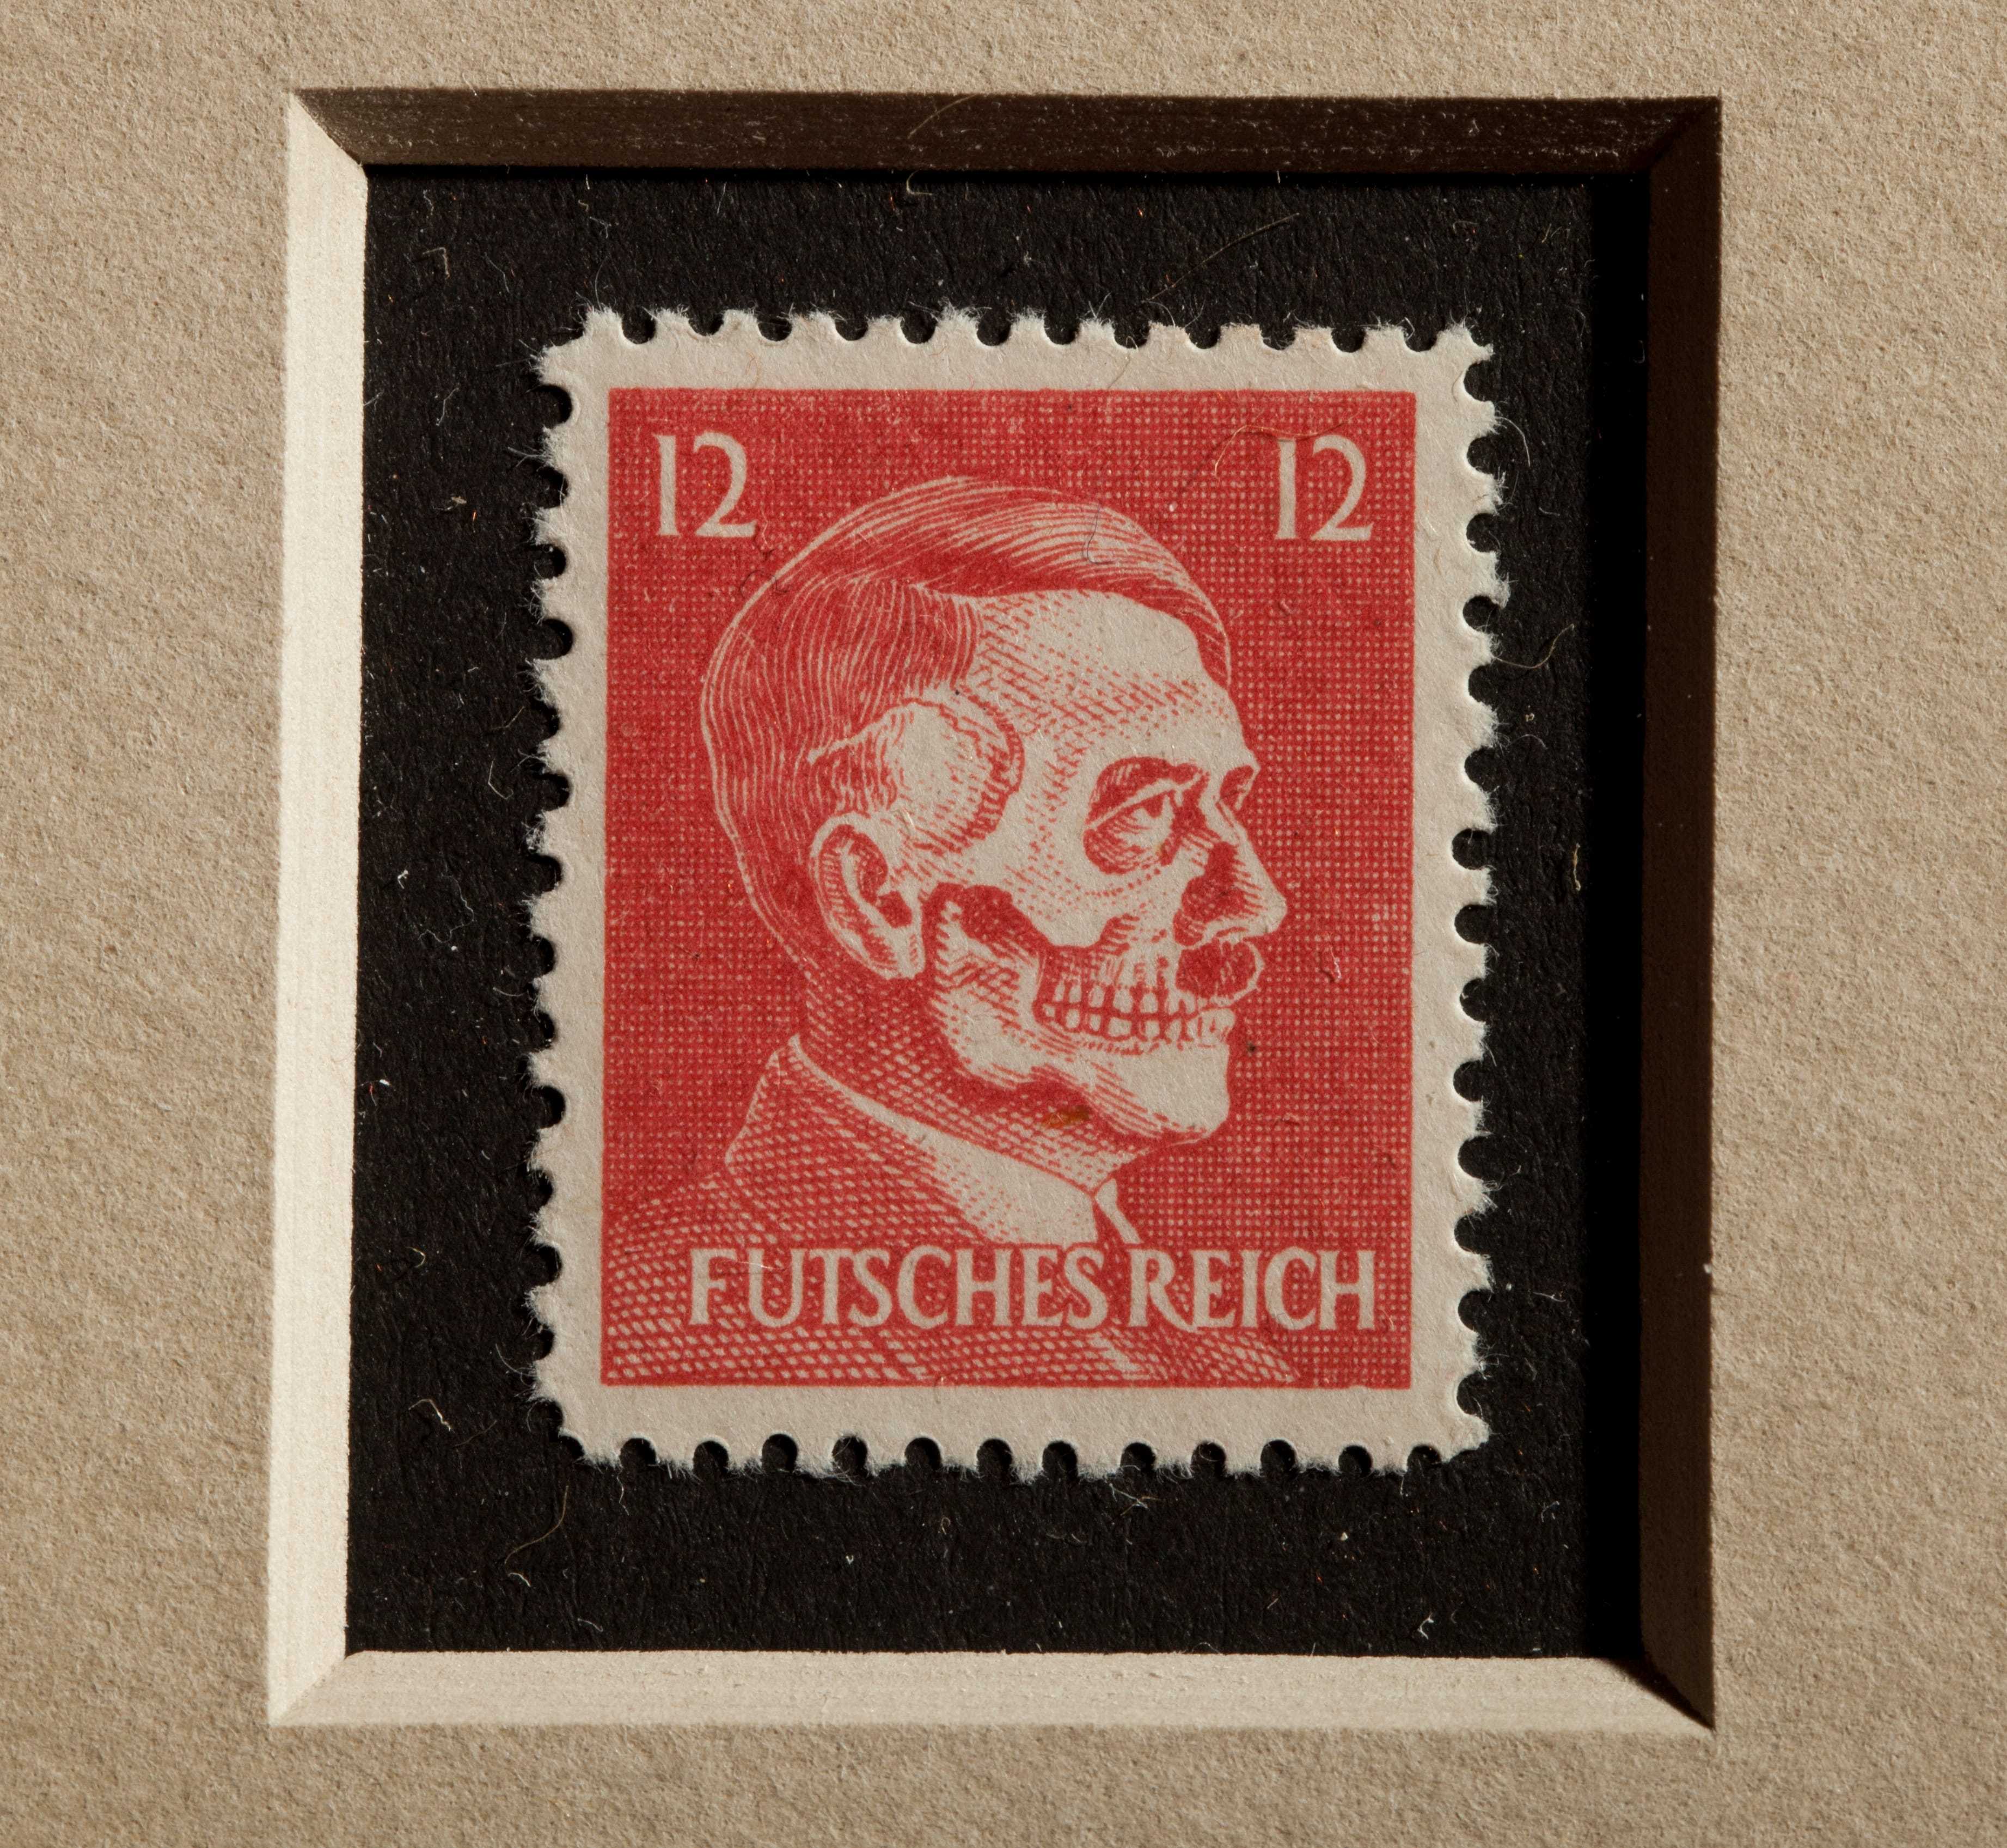 A rectangular postage stamp with a red background and white text. The image is a side profile of Adolf Hitler with a skeletal face.